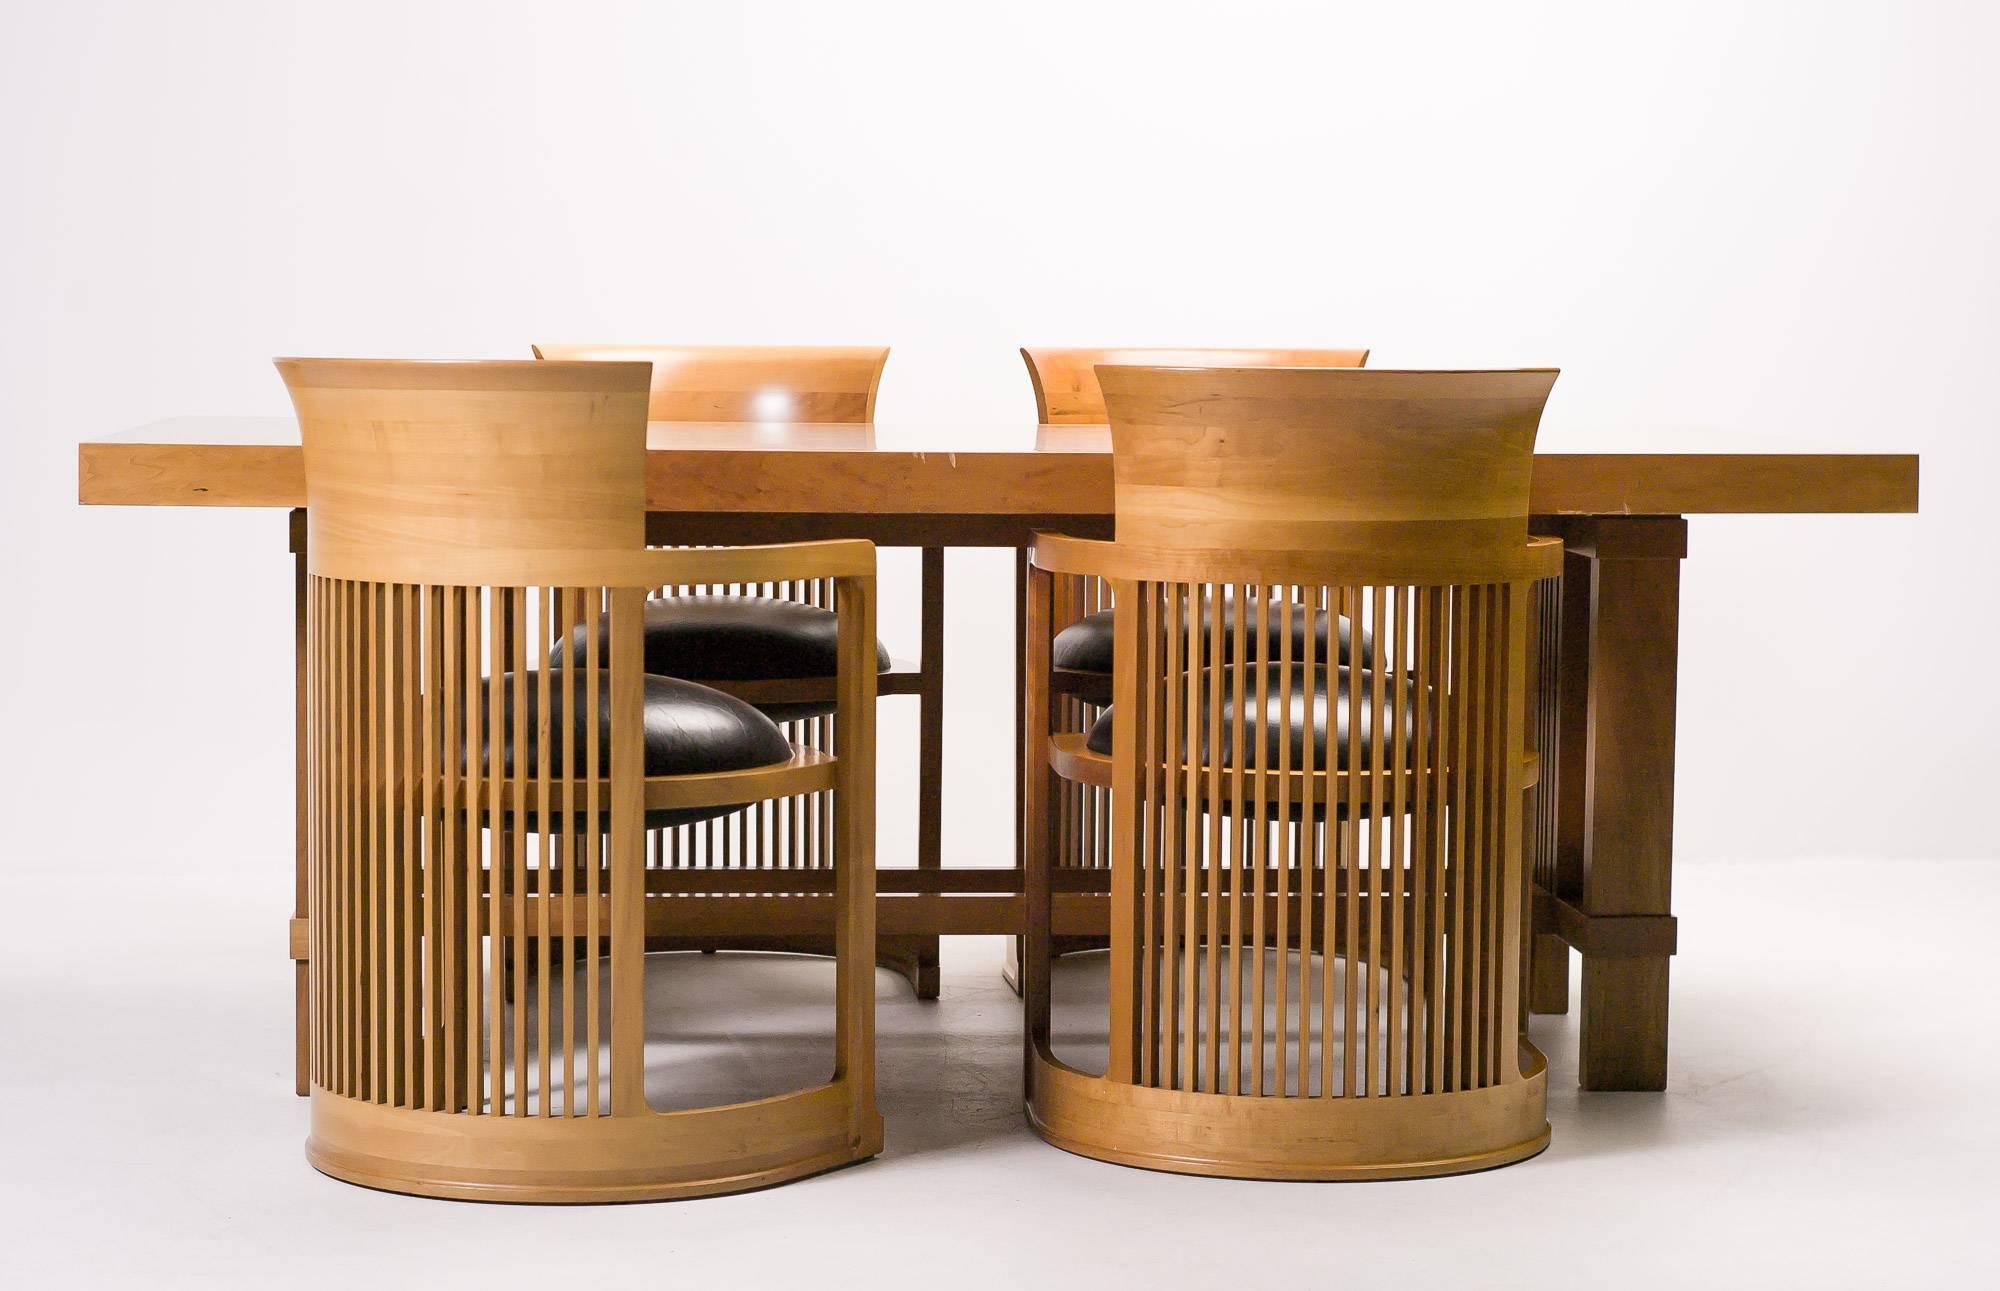 frank lloyd wright dining table and chairs